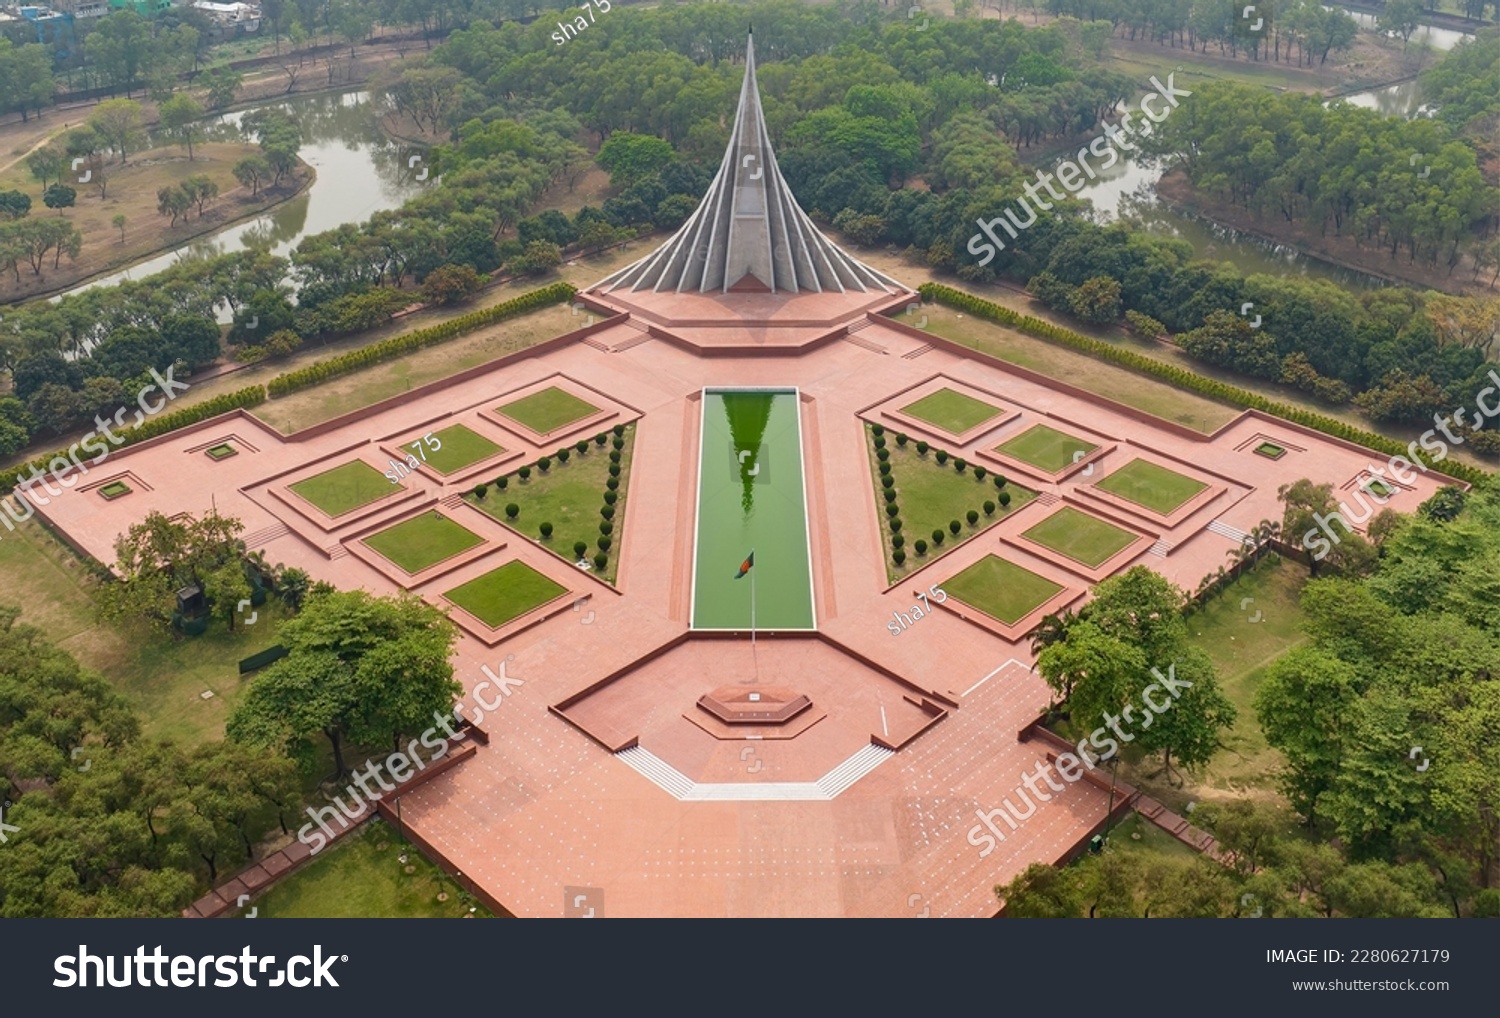 The National Martyrs' Memoria is the national monument of Bangladesh, built to honour and remember those who died during the War of Liberation and Geno #2280627179